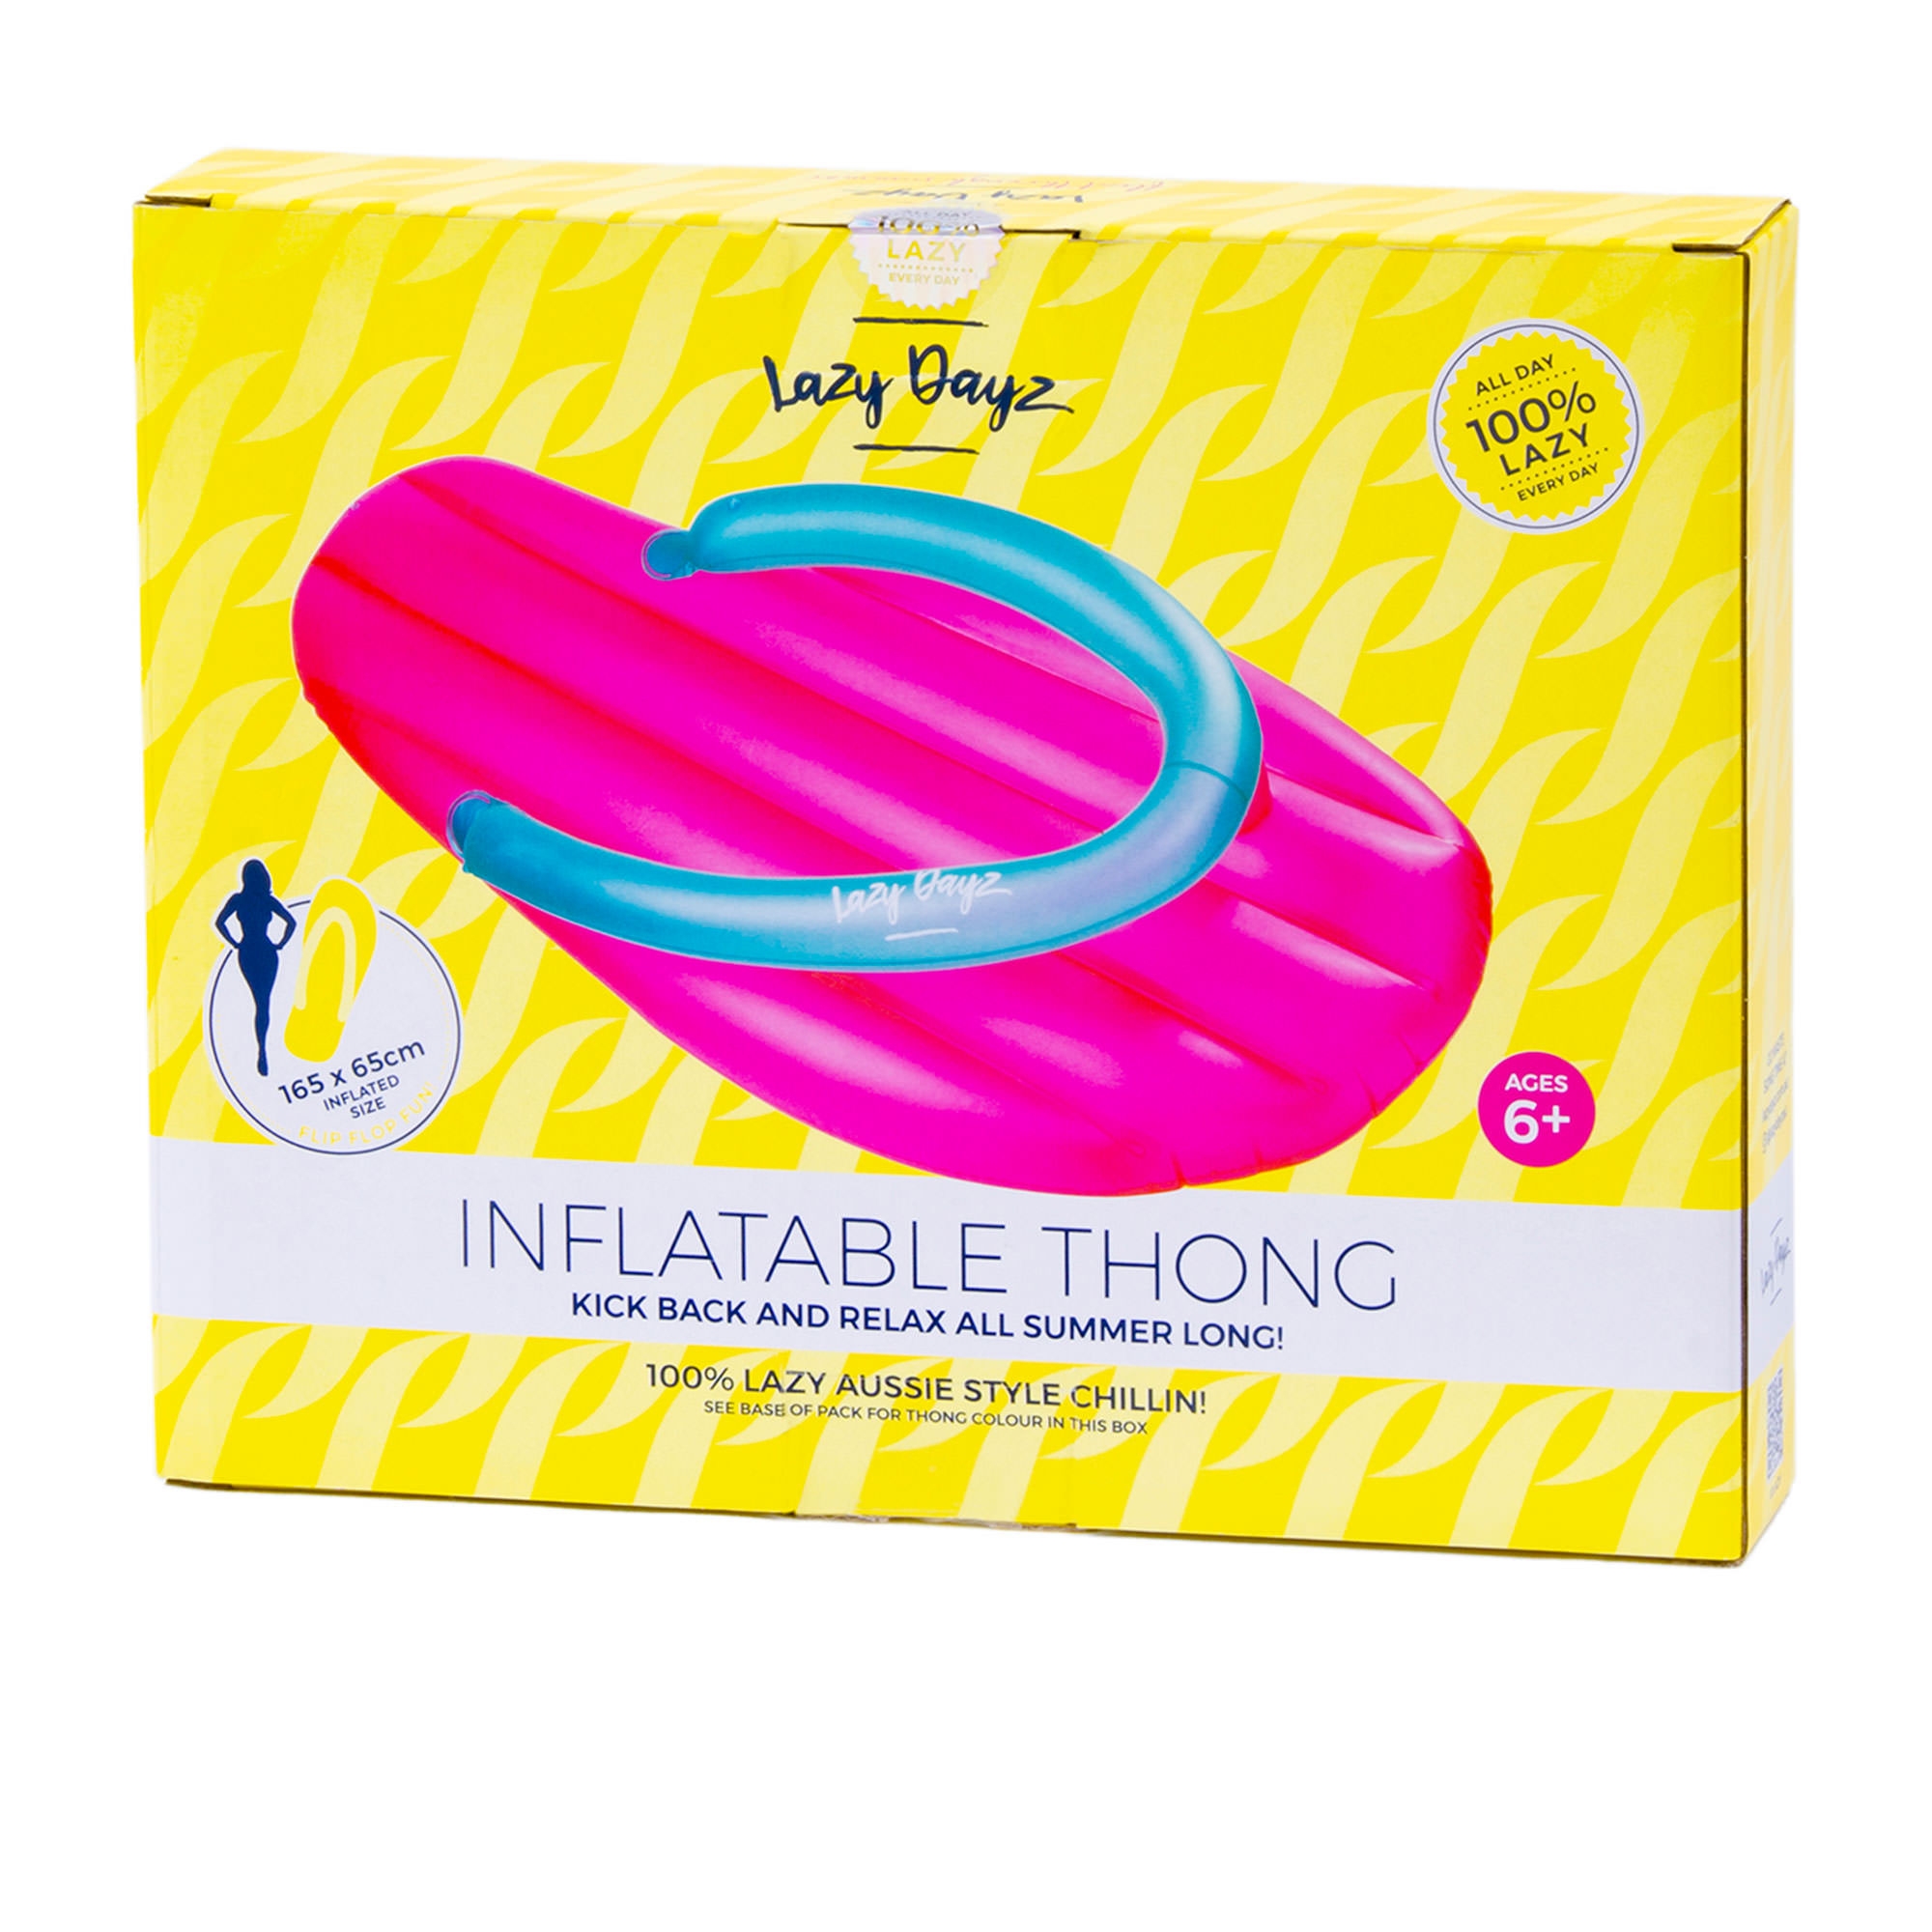 Lazy Dayz Inflatable Thong Pink Image 2